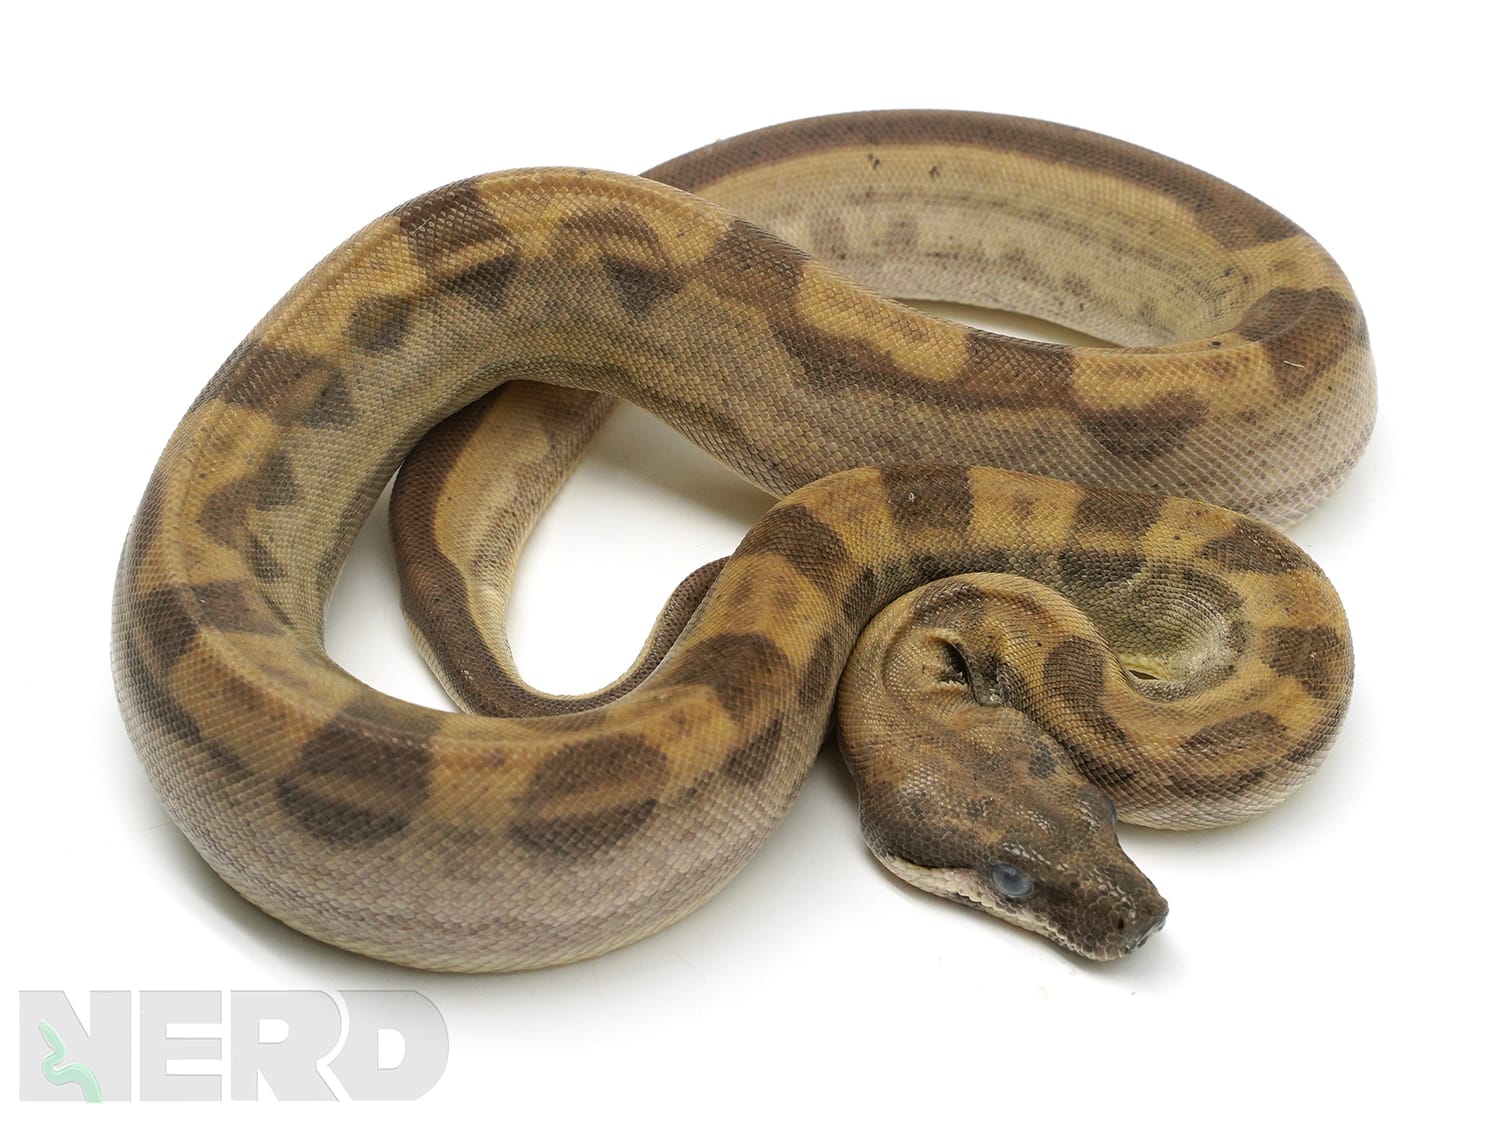 Ghost Motley Boa Constrictor by New England Reptile Distributors